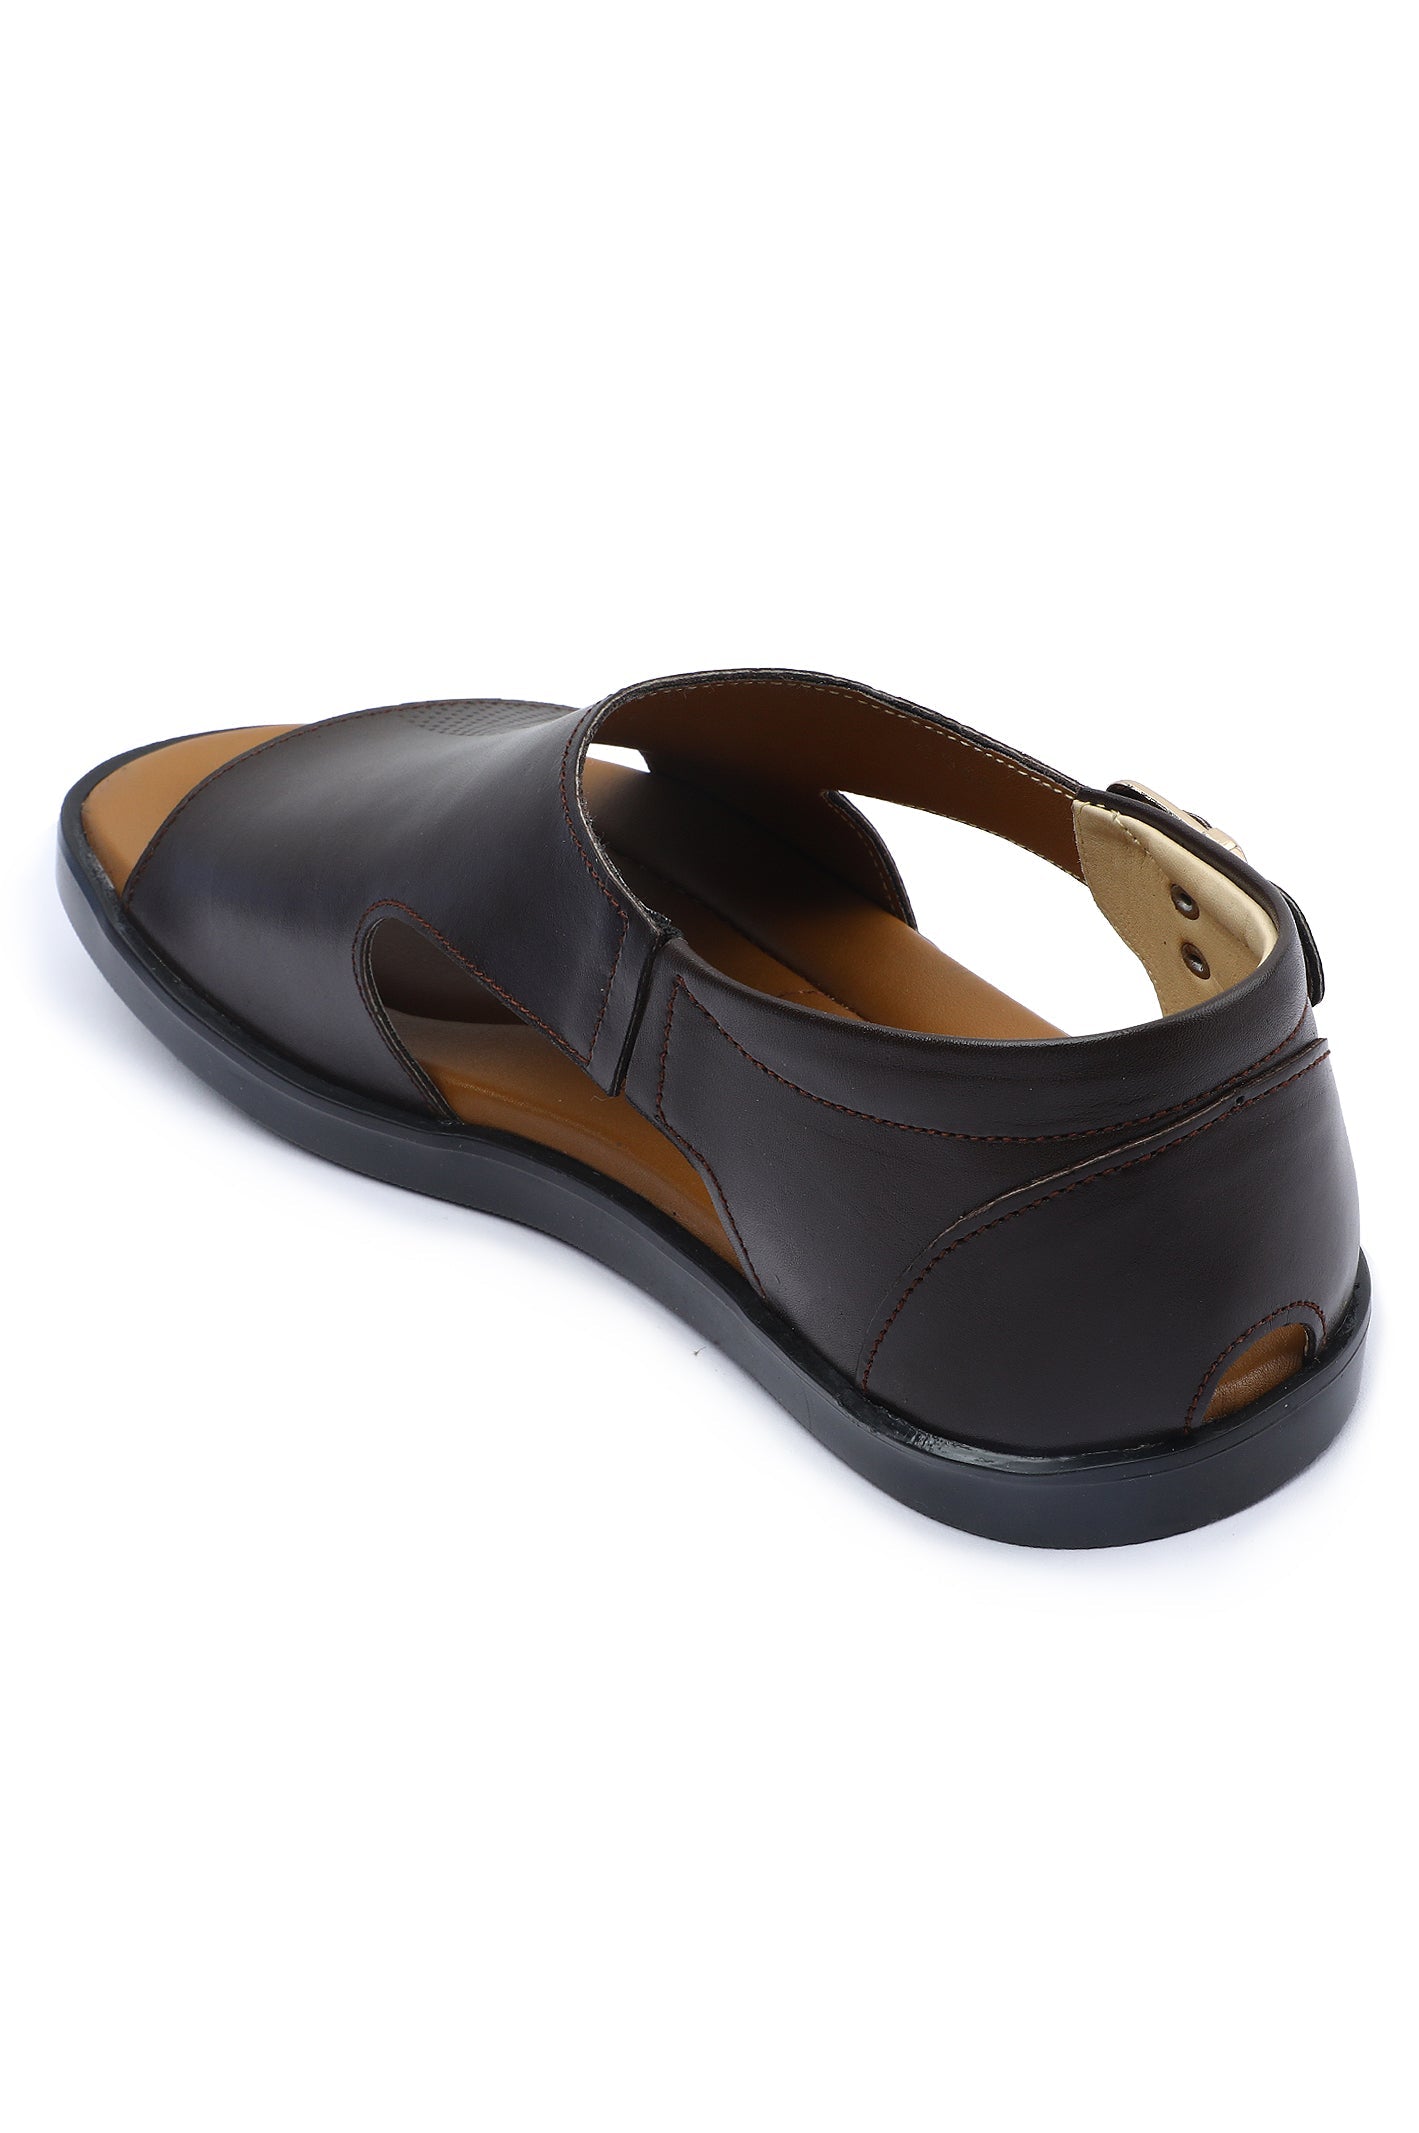 French Emporio Men's Sandal SKU: SLD-0046-COFFEE - Diners